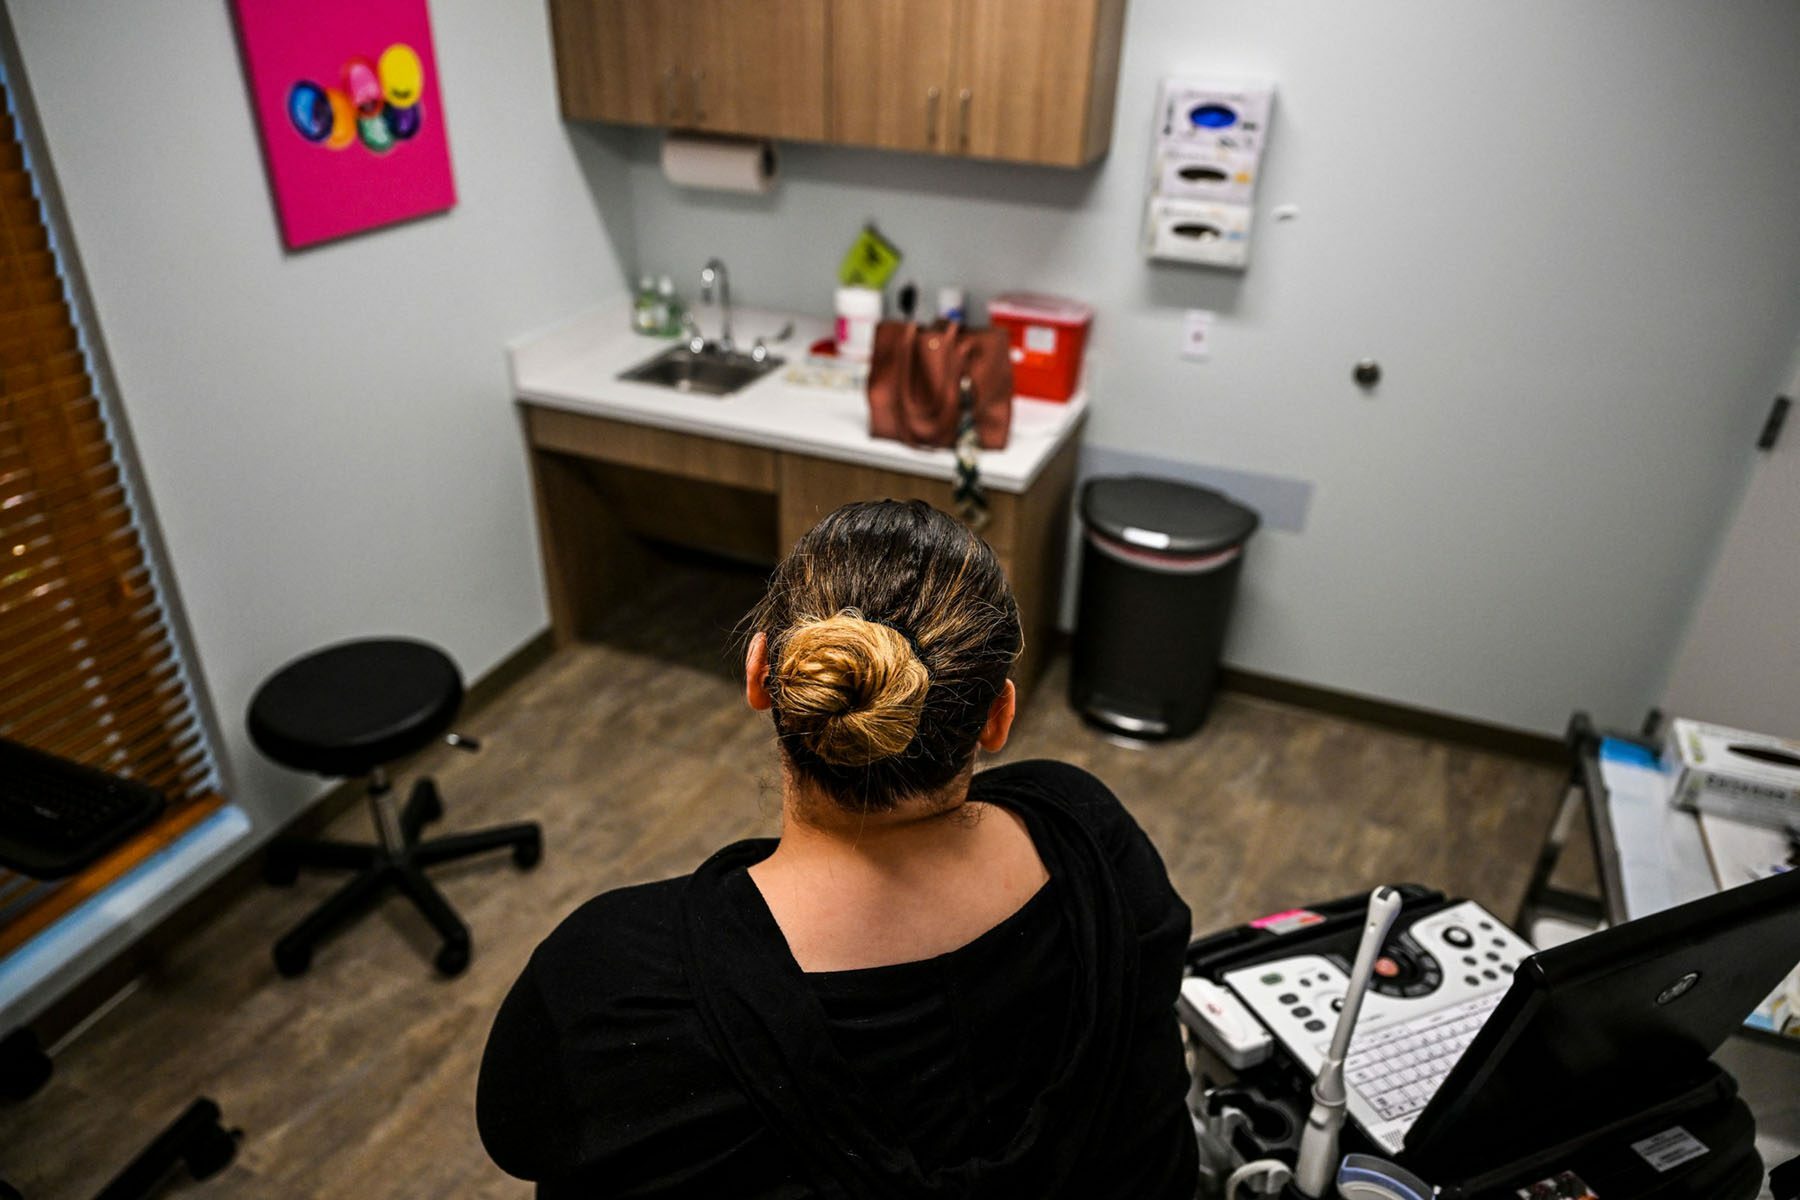 A patient waits to receive an abortion at a Planned Parenthood Abortion Clinic in West Palm Beach, Florida.